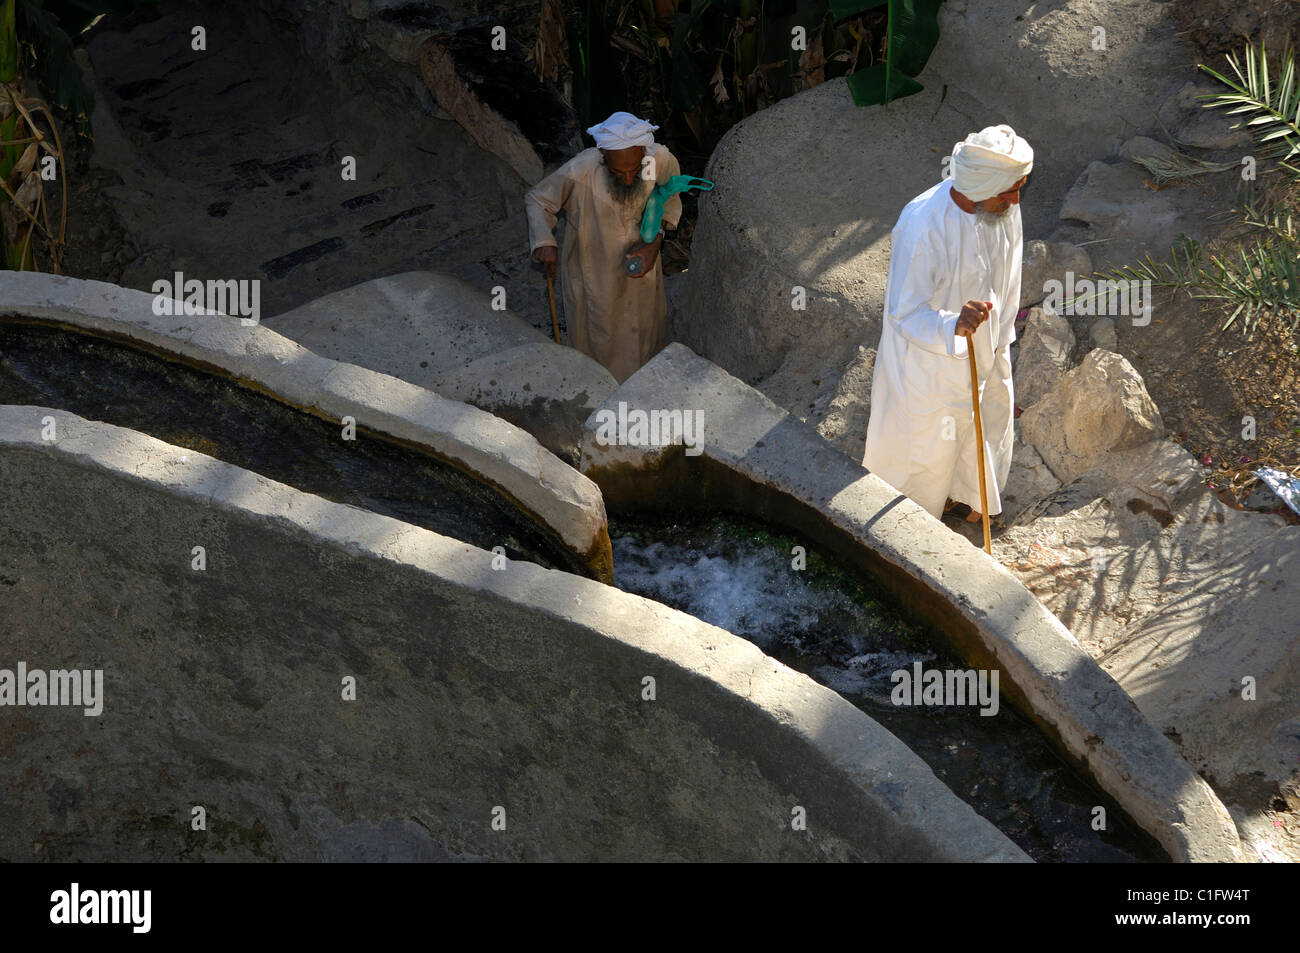 Elder Omani men in traditional clothing walking past an irrigation canal, Misfah al-Ibriyeen, Sultanate of Oman Stock Photo